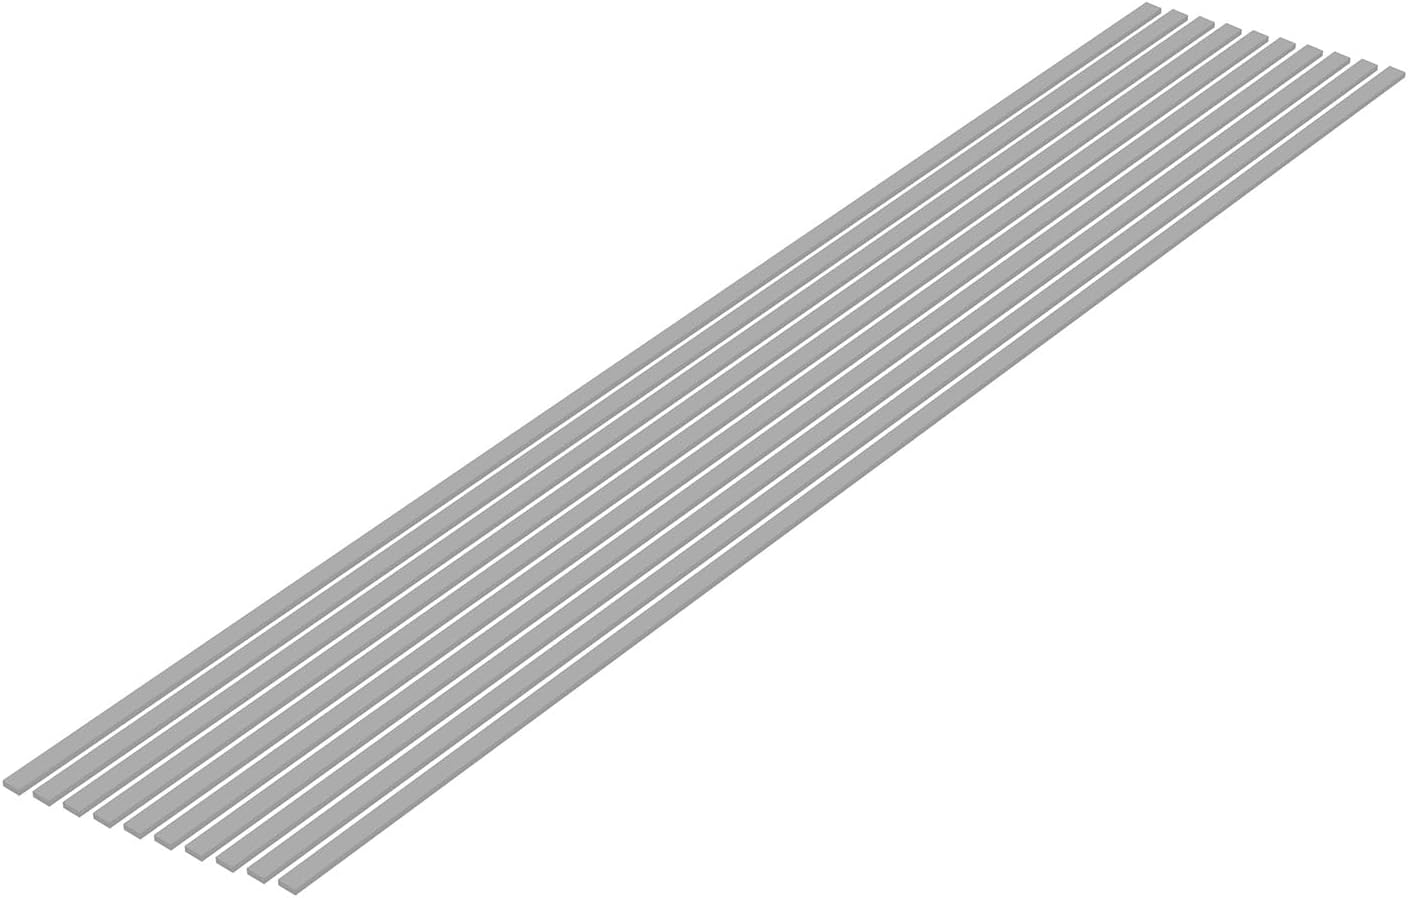 Wave Material Series OM-485 Plastic Material, Gray, Shredded Board, 0.04 x 0.2 inches (1.0 x 5.0 mm), 10 Pieces - BanzaiHobby